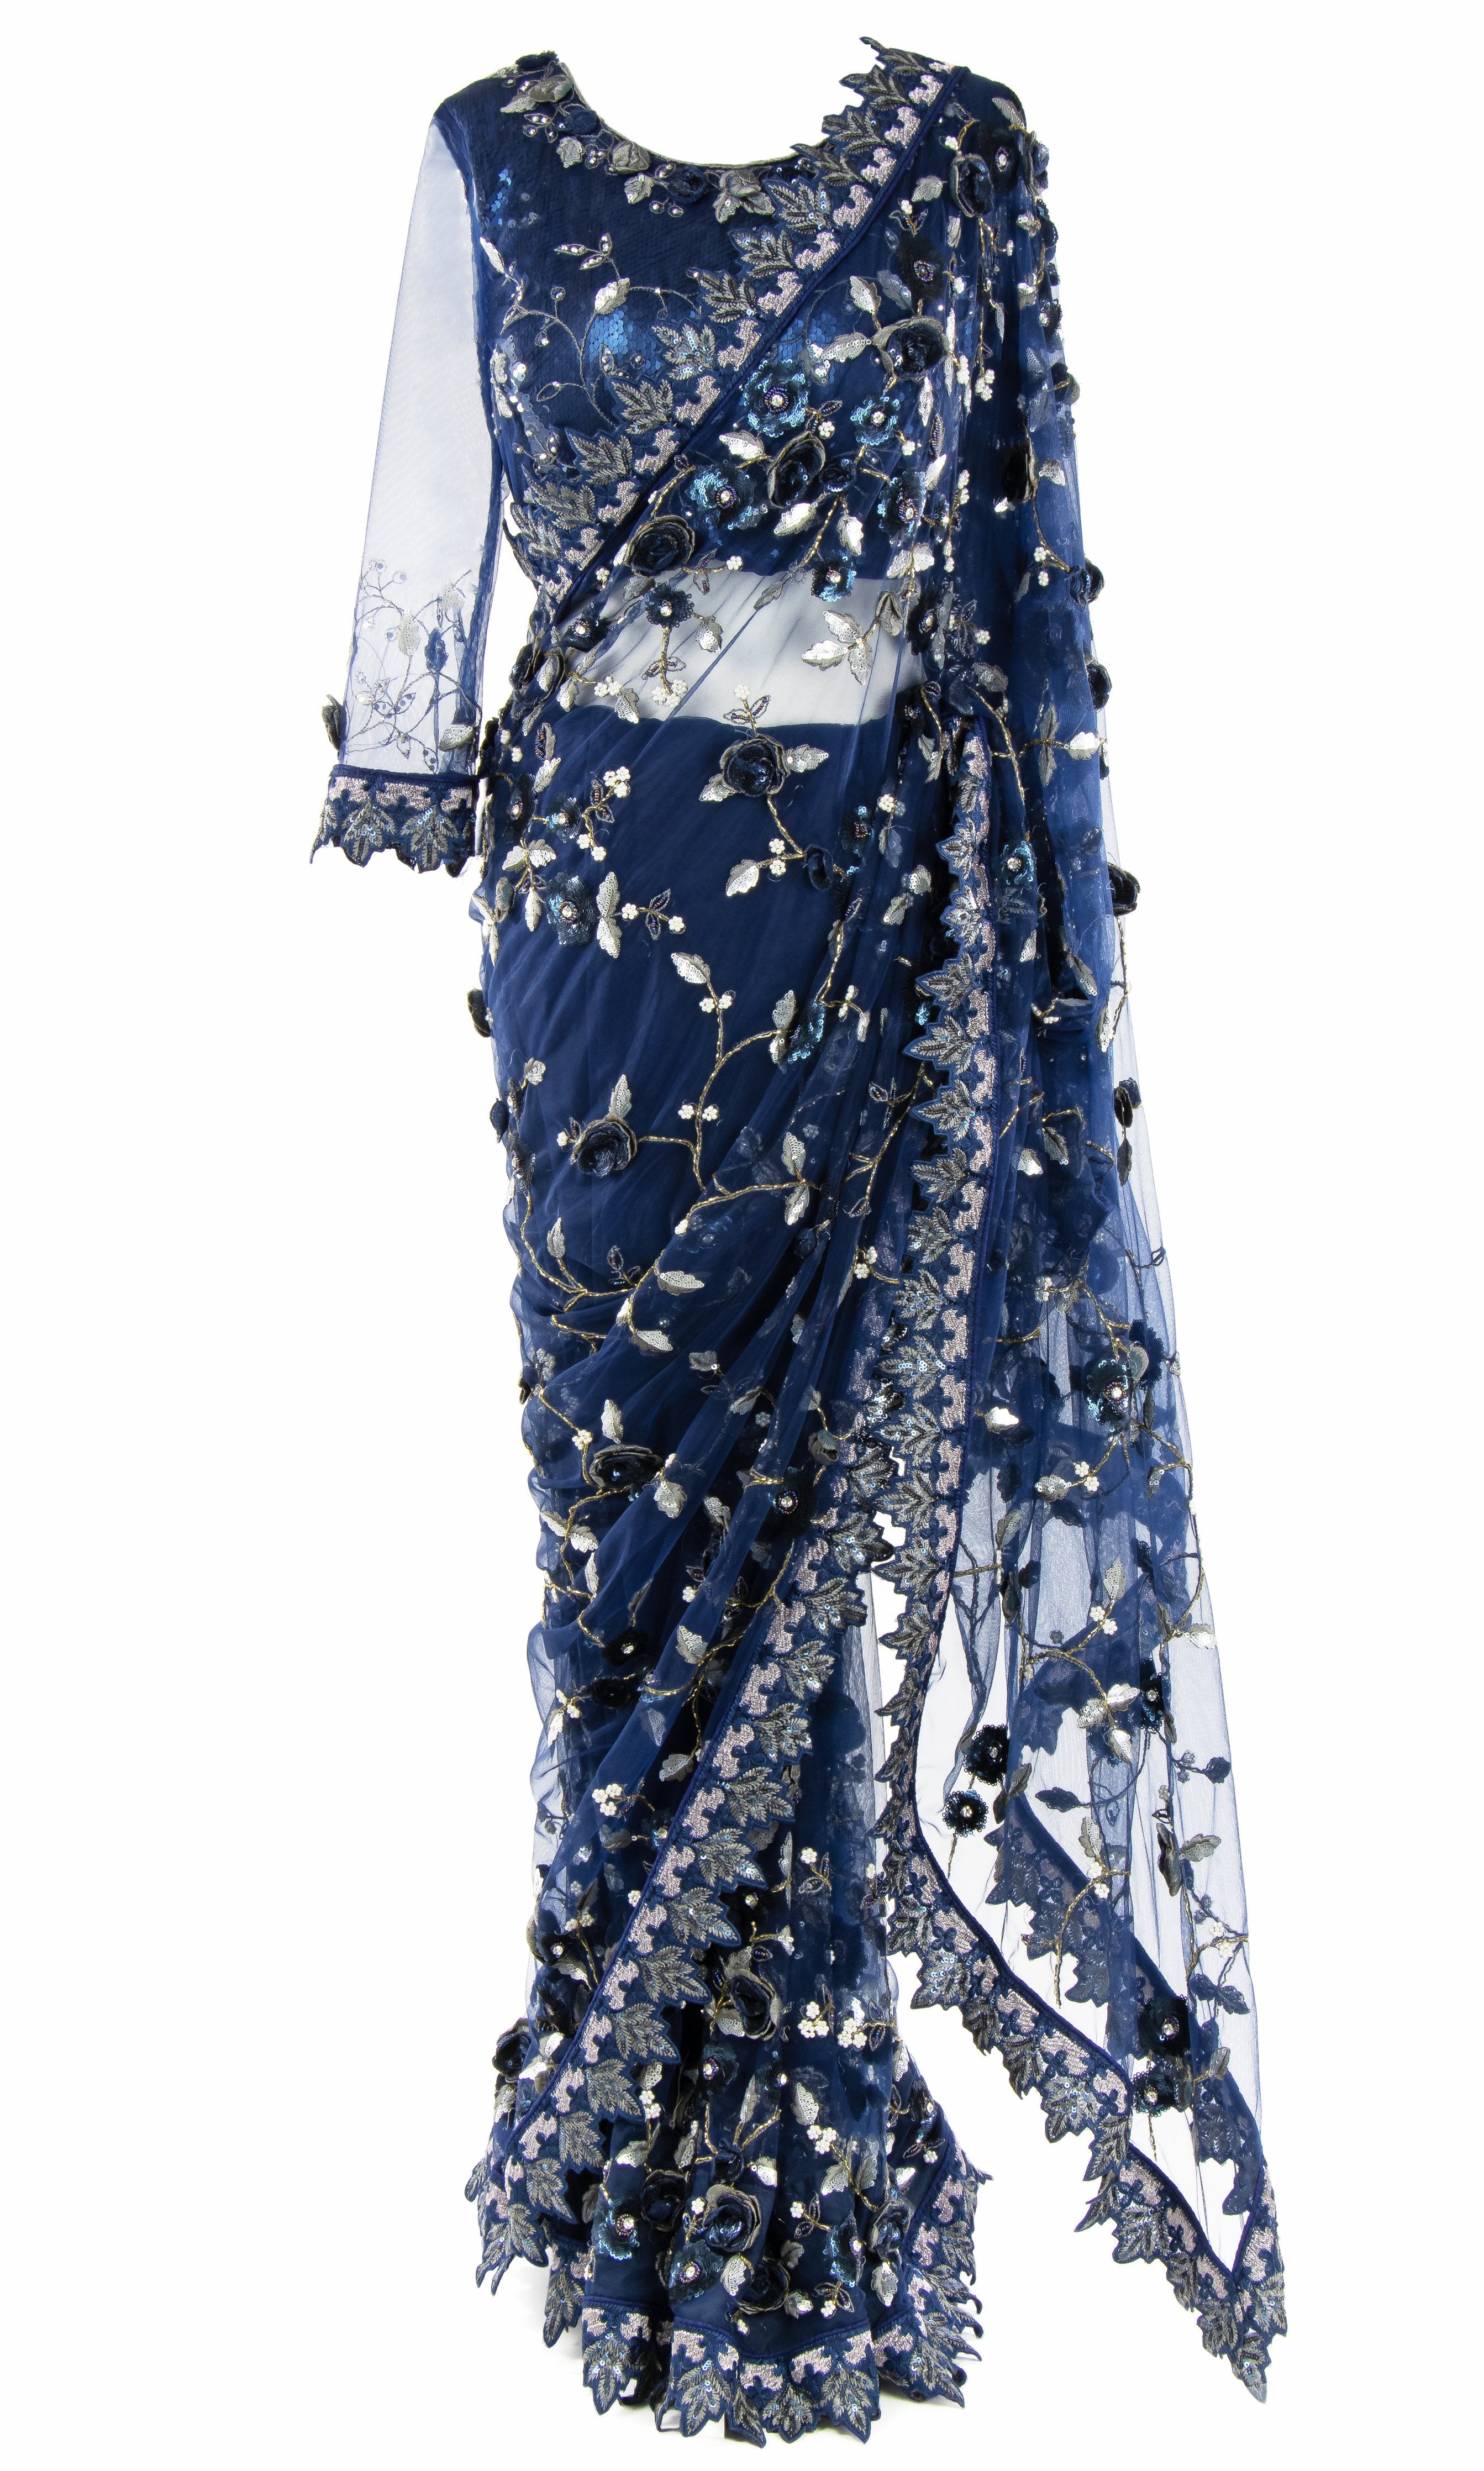 Petticoat Paired with a matching net Saree encrusted with stunning silver beadwork and sequins.